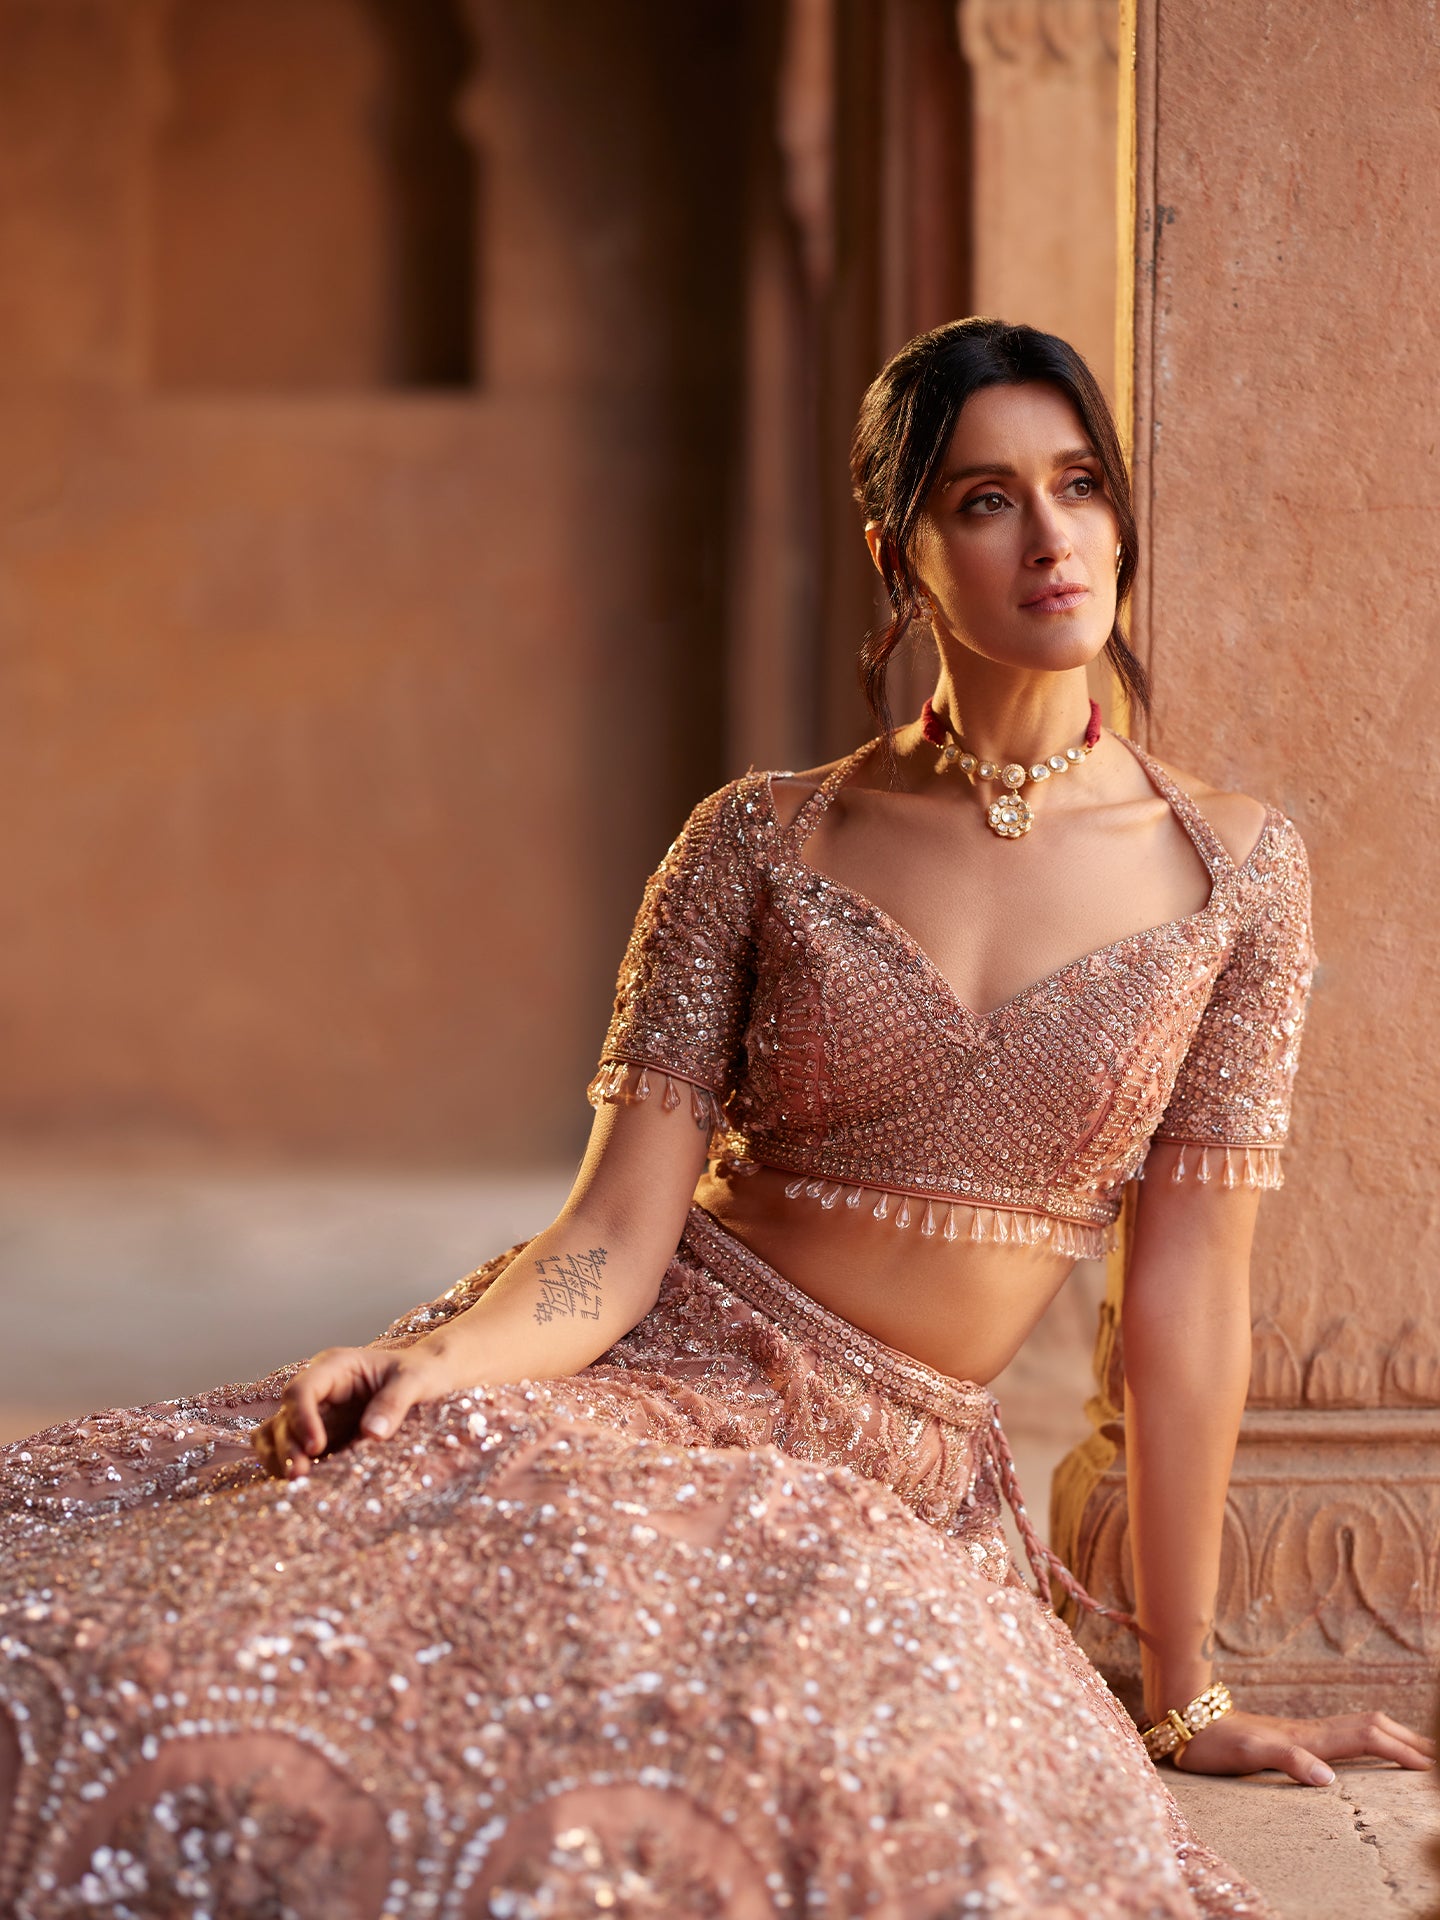 How to Choose Indian Bridal Jewelry for Your Wedding Day